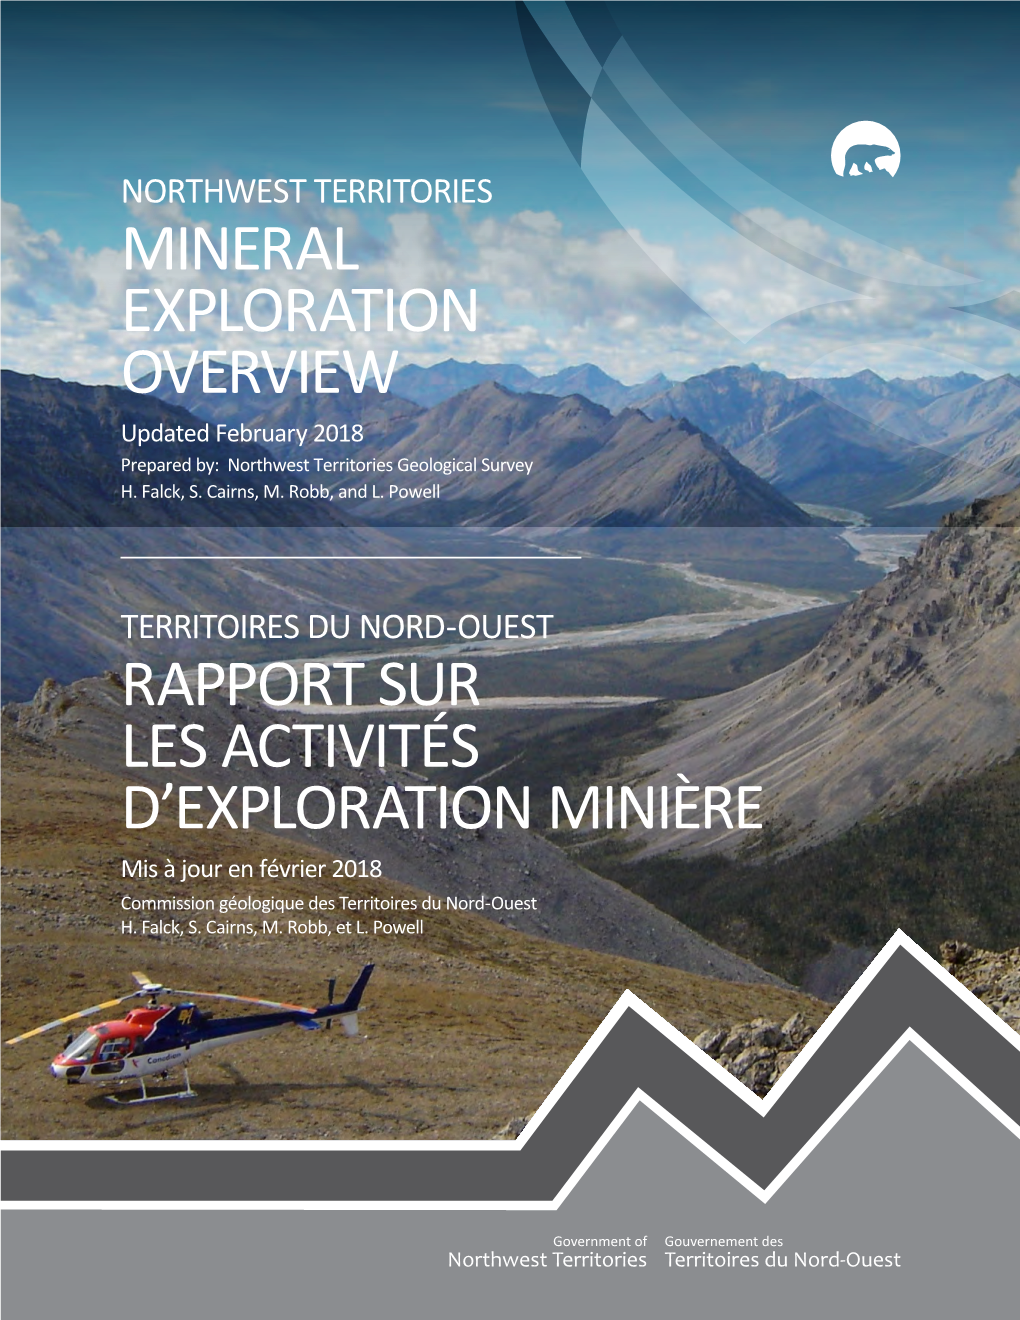 2017 NWT Mineral Exploration Overview